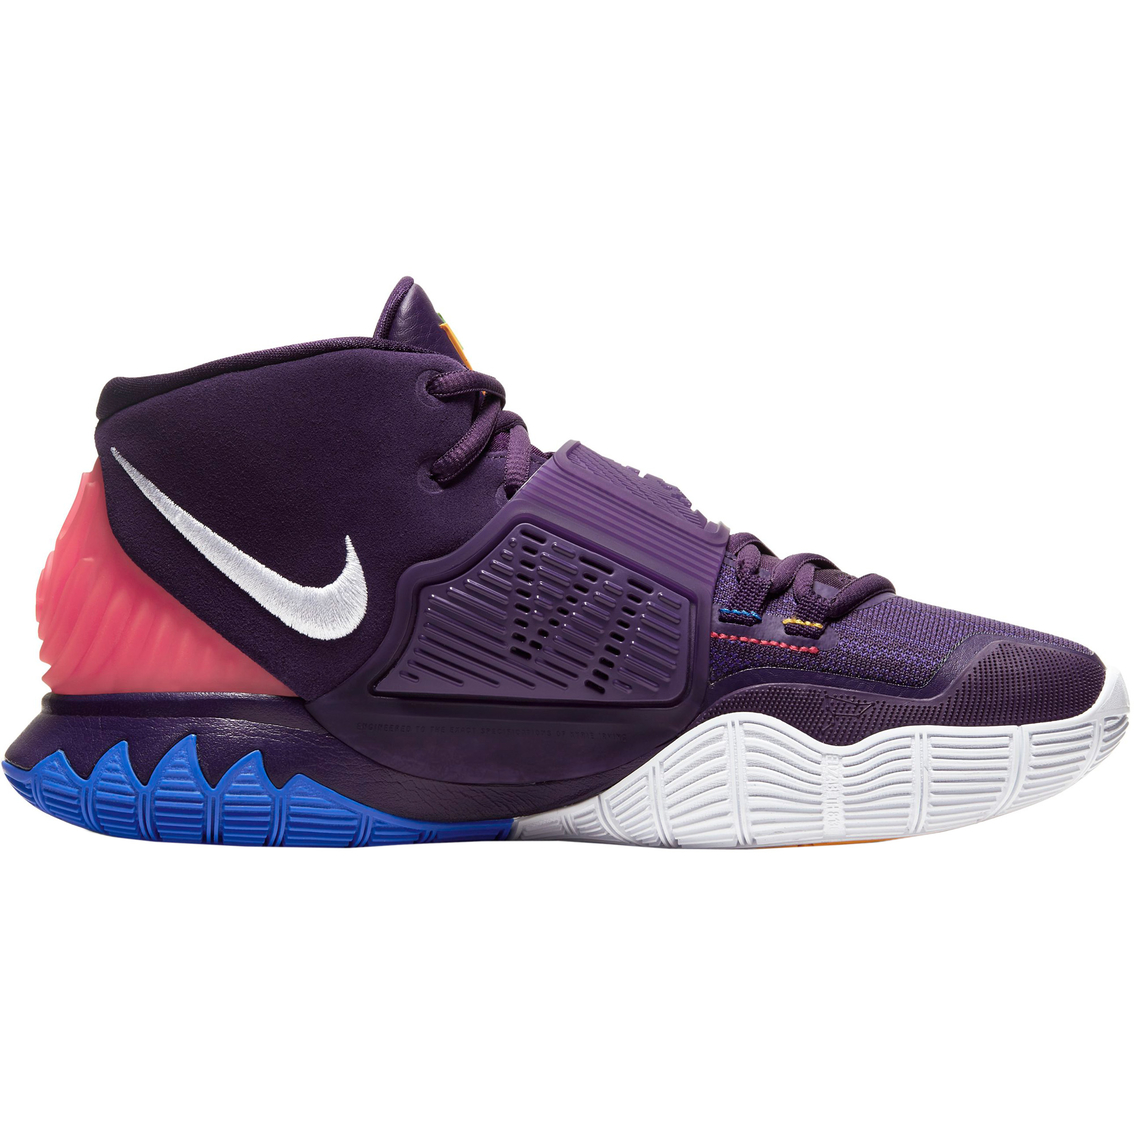 Nike Men's Kyrie VI Court Shoes - Image 2 of 7